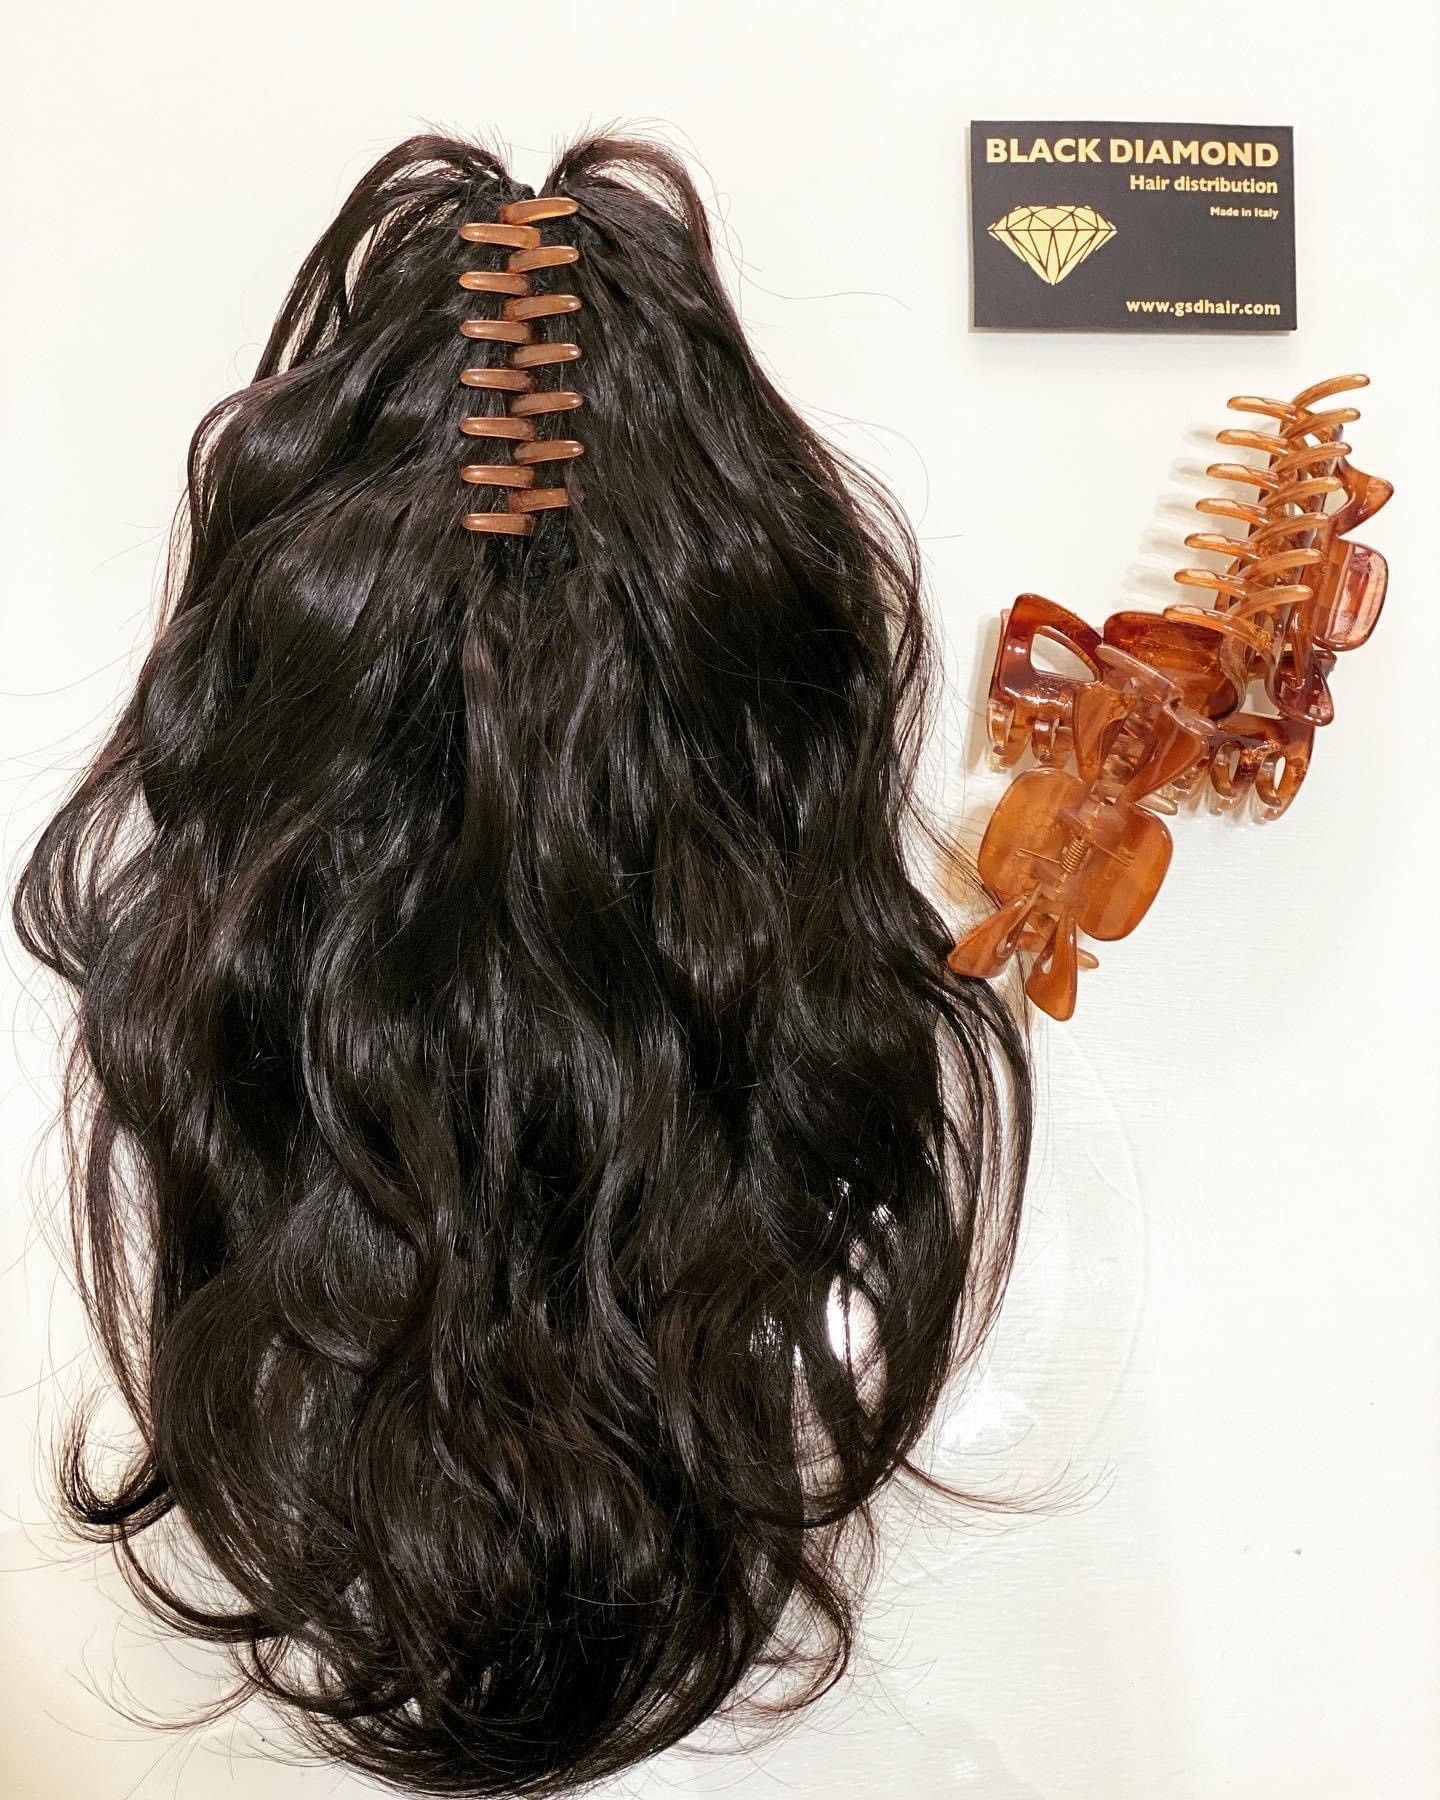 tail with shatush clamp and wavy highlights | Black diamond hair  distribution